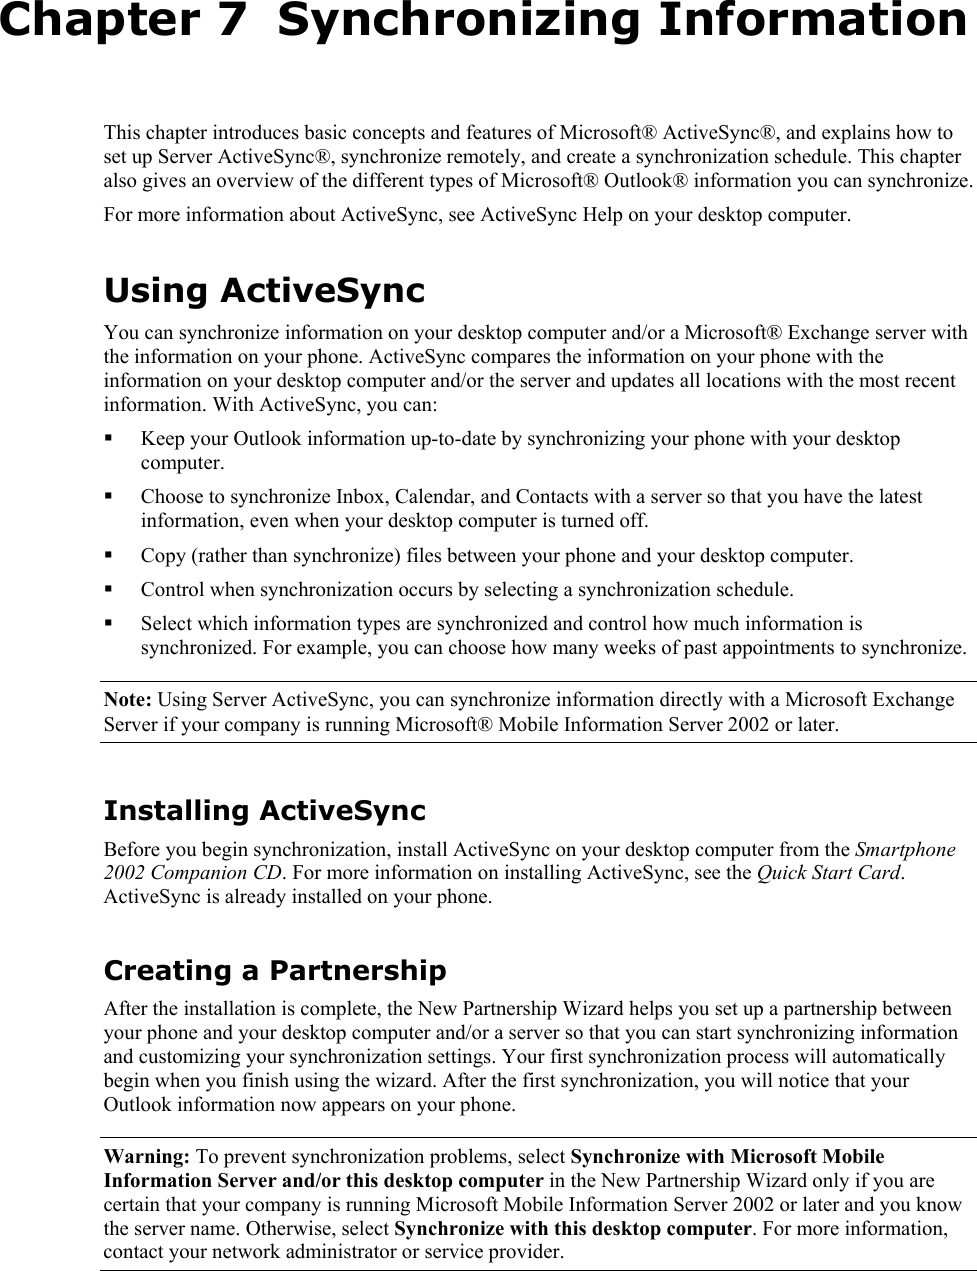   Chapter 7  Synchronizing Information This chapter introduces basic concepts and features of Microsoft® ActiveSync®, and explains how to set up Server ActiveSync®, synchronize remotely, and create a synchronization schedule. This chapter also gives an overview of the different types of Microsoft® Outlook® information you can synchronize. For more information about ActiveSync, see ActiveSync Help on your desktop computer. Using ActiveSync You can synchronize information on your desktop computer and/or a Microsoft® Exchange server with the information on your phone. ActiveSync compares the information on your phone with the information on your desktop computer and/or the server and updates all locations with the most recent information. With ActiveSync, you can:  Keep your Outlook information up-to-date by synchronizing your phone with your desktop computer.  Choose to synchronize Inbox, Calendar, and Contacts with a server so that you have the latest information, even when your desktop computer is turned off.  Copy (rather than synchronize) files between your phone and your desktop computer.  Control when synchronization occurs by selecting a synchronization schedule.  Select which information types are synchronized and control how much information is synchronized. For example, you can choose how many weeks of past appointments to synchronize. Note: Using Server ActiveSync, you can synchronize information directly with a Microsoft Exchange Server if your company is running Microsoft® Mobile Information Server 2002 or later. Installing ActiveSync Before you begin synchronization, install ActiveSync on your desktop computer from the Smartphone 2002 Companion CD. For more information on installing ActiveSync, see the Quick Start Card. ActiveSync is already installed on your phone. Creating a Partnership After the installation is complete, the New Partnership Wizard helps you set up a partnership between your phone and your desktop computer and/or a server so that you can start synchronizing information and customizing your synchronization settings. Your first synchronization process will automatically begin when you finish using the wizard. After the first synchronization, you will notice that your Outlook information now appears on your phone. Warning: To prevent synchronization problems, select Synchronize with Microsoft Mobile Information Server and/or this desktop computer in the New Partnership Wizard only if you are certain that your company is running Microsoft Mobile Information Server 2002 or later and you know the server name. Otherwise, select Synchronize with this desktop computer. For more information, contact your network administrator or service provider. 